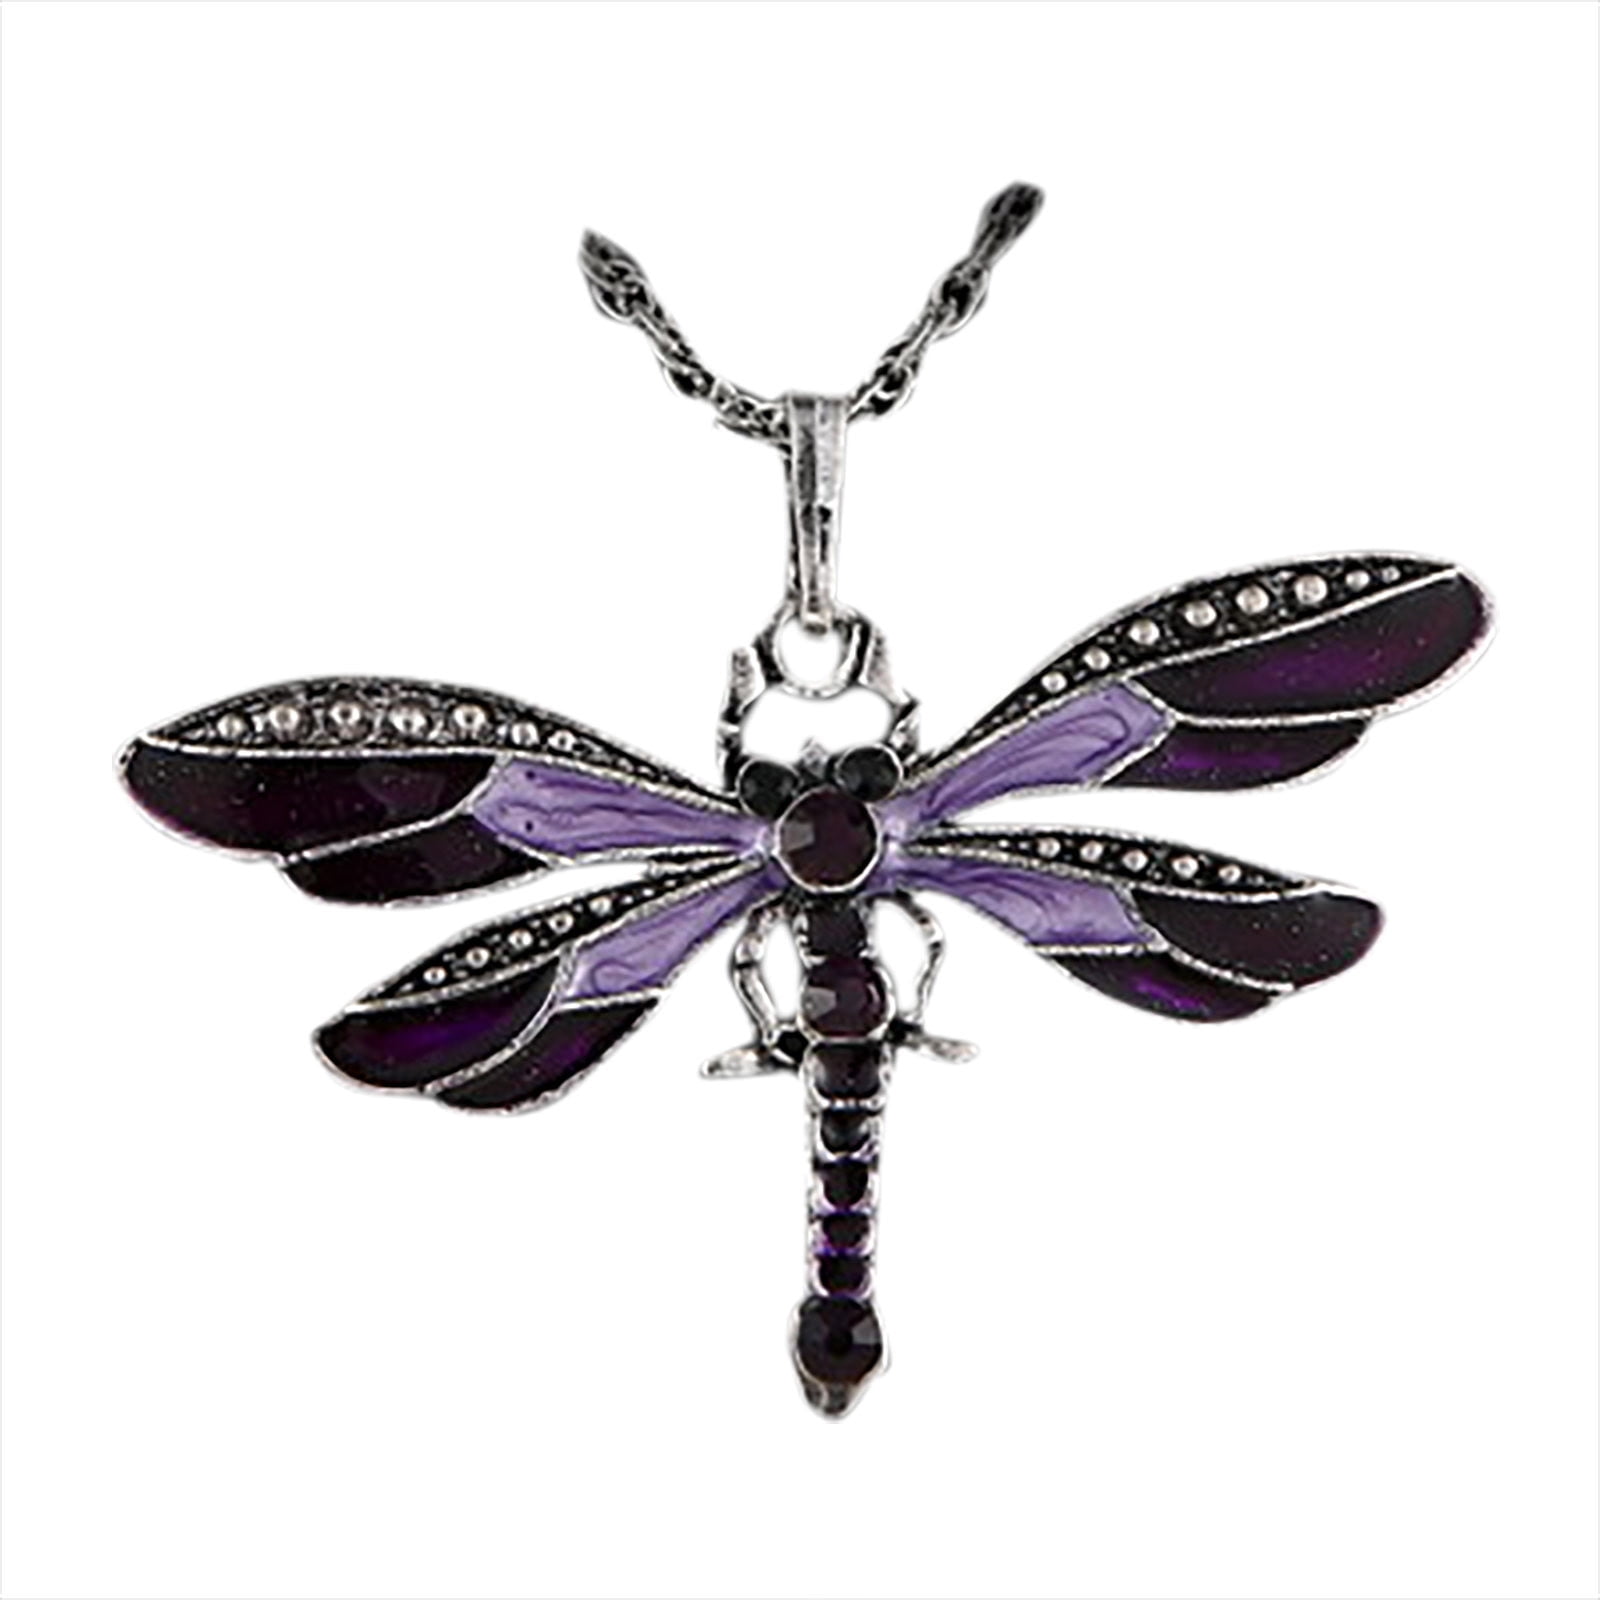 Vintage Dragonfly Crystal Necklace Pendant Women Fashion Jewelry Sweater Chain 